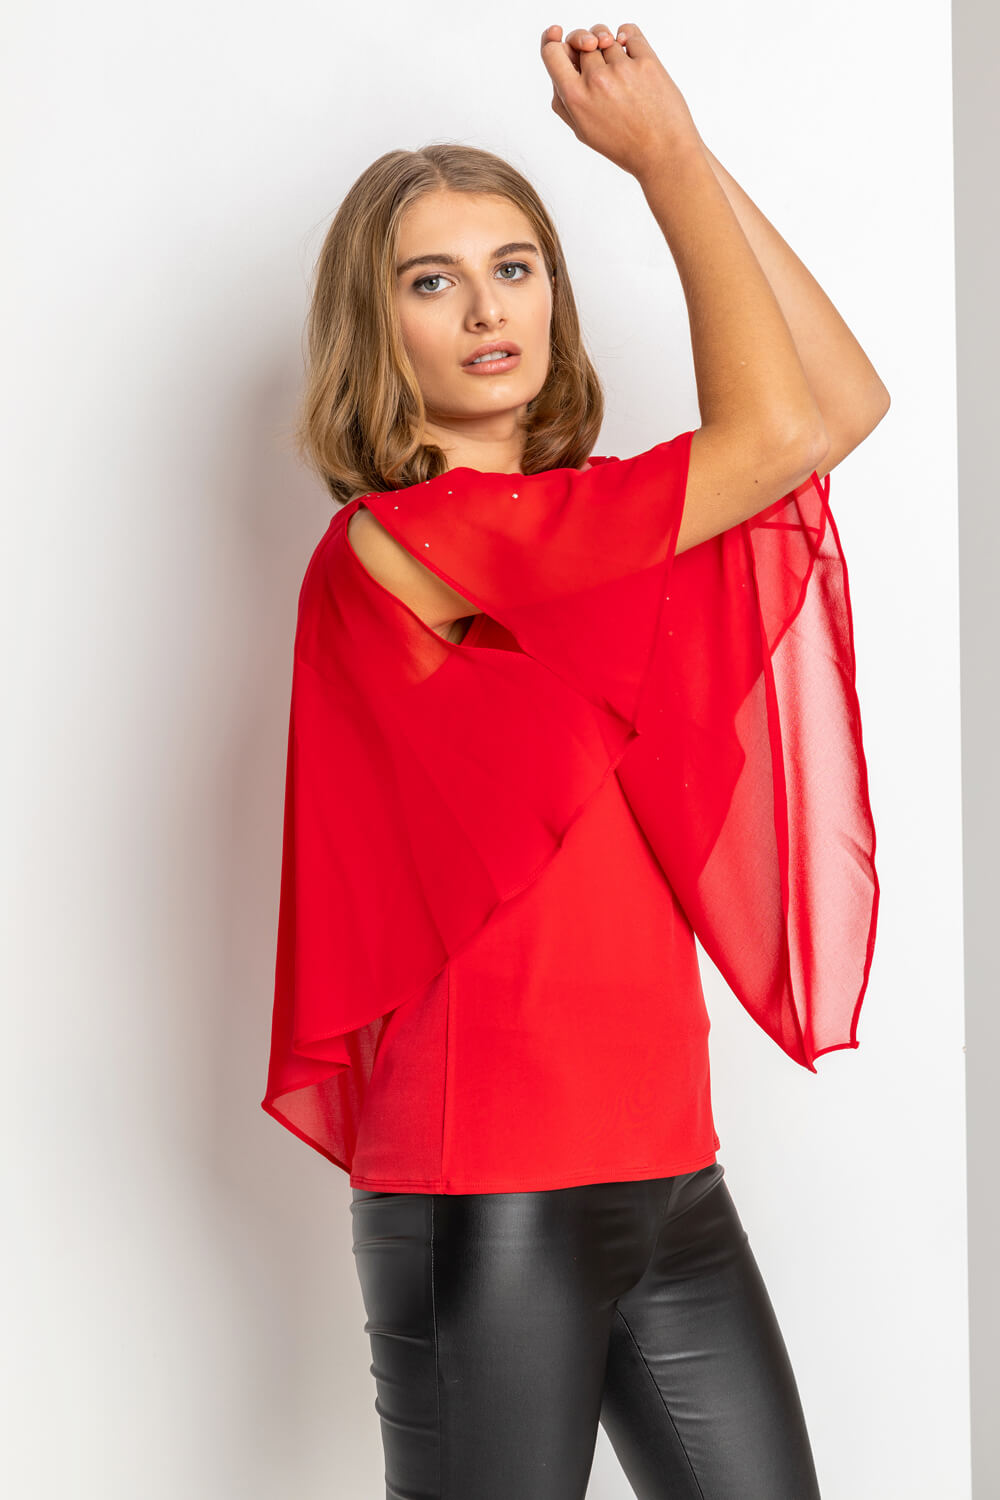 Red Embellished Chiffon Overlay Top, Image 5 of 5